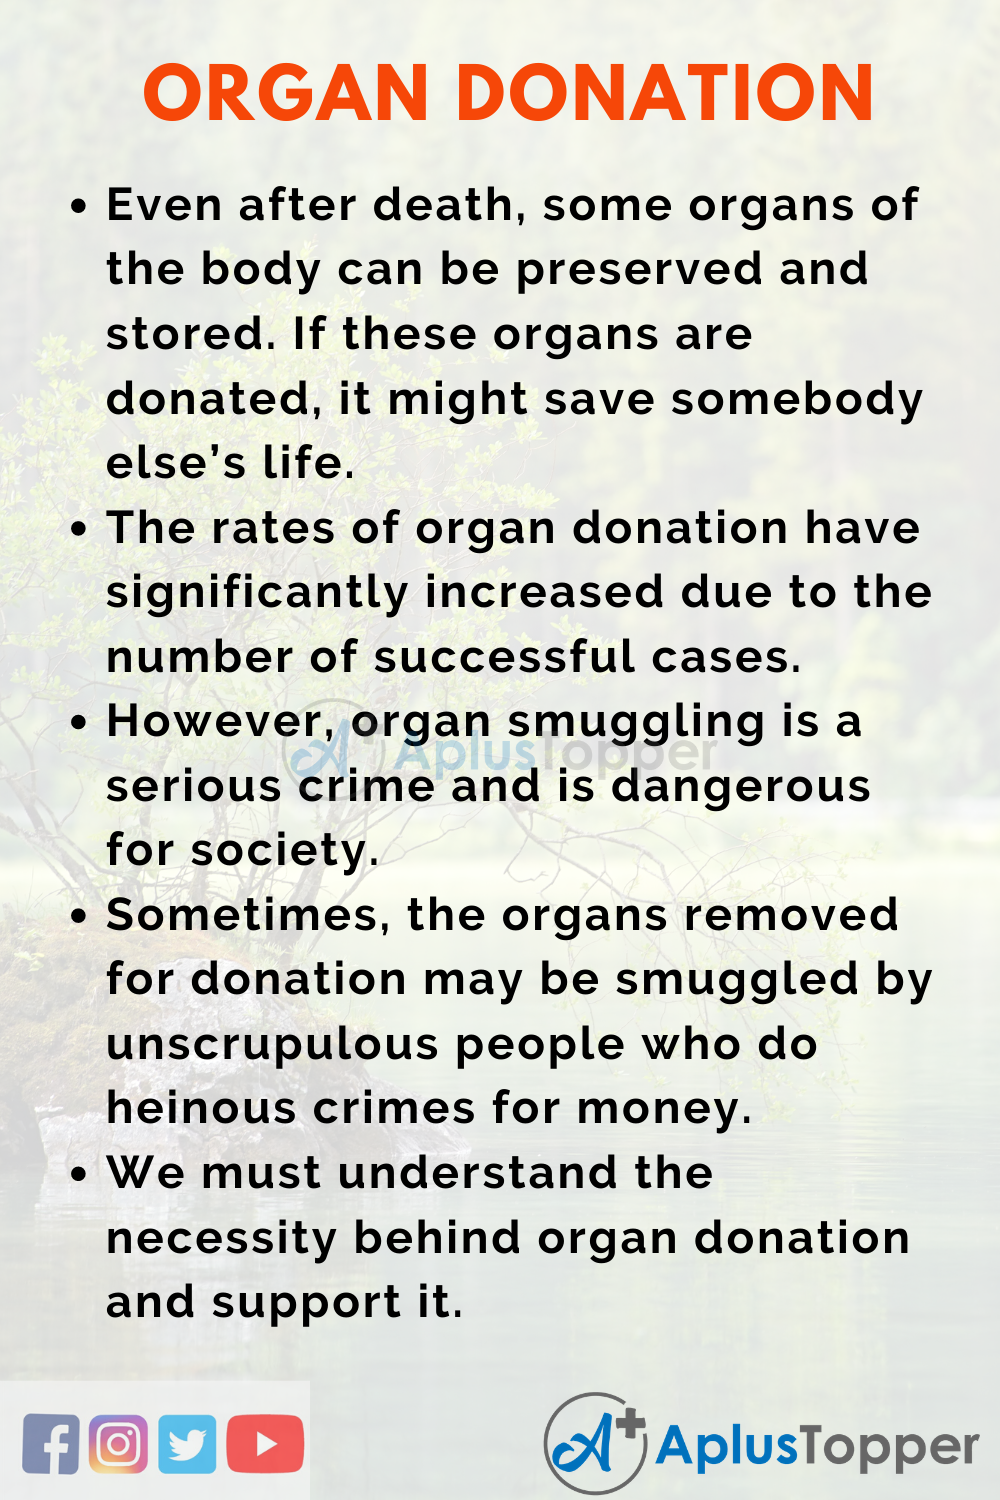 thesis statement of organ donation